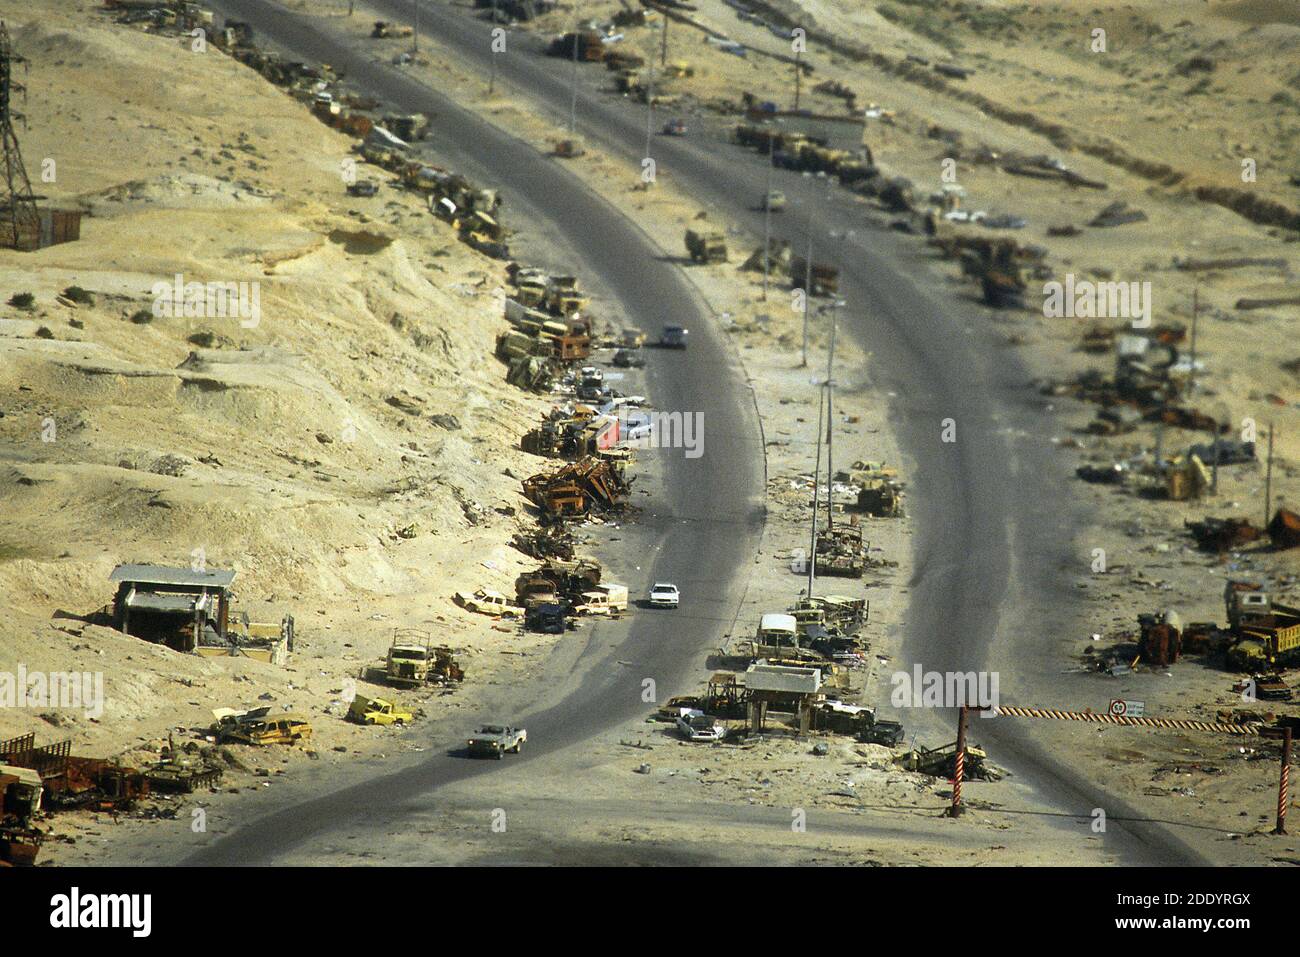 The aftermath of the massacre of the Iraqi convoy by the coalition forces, on the road to Basra, during Operation Granby, the Gulf War 1991. Stock Photo